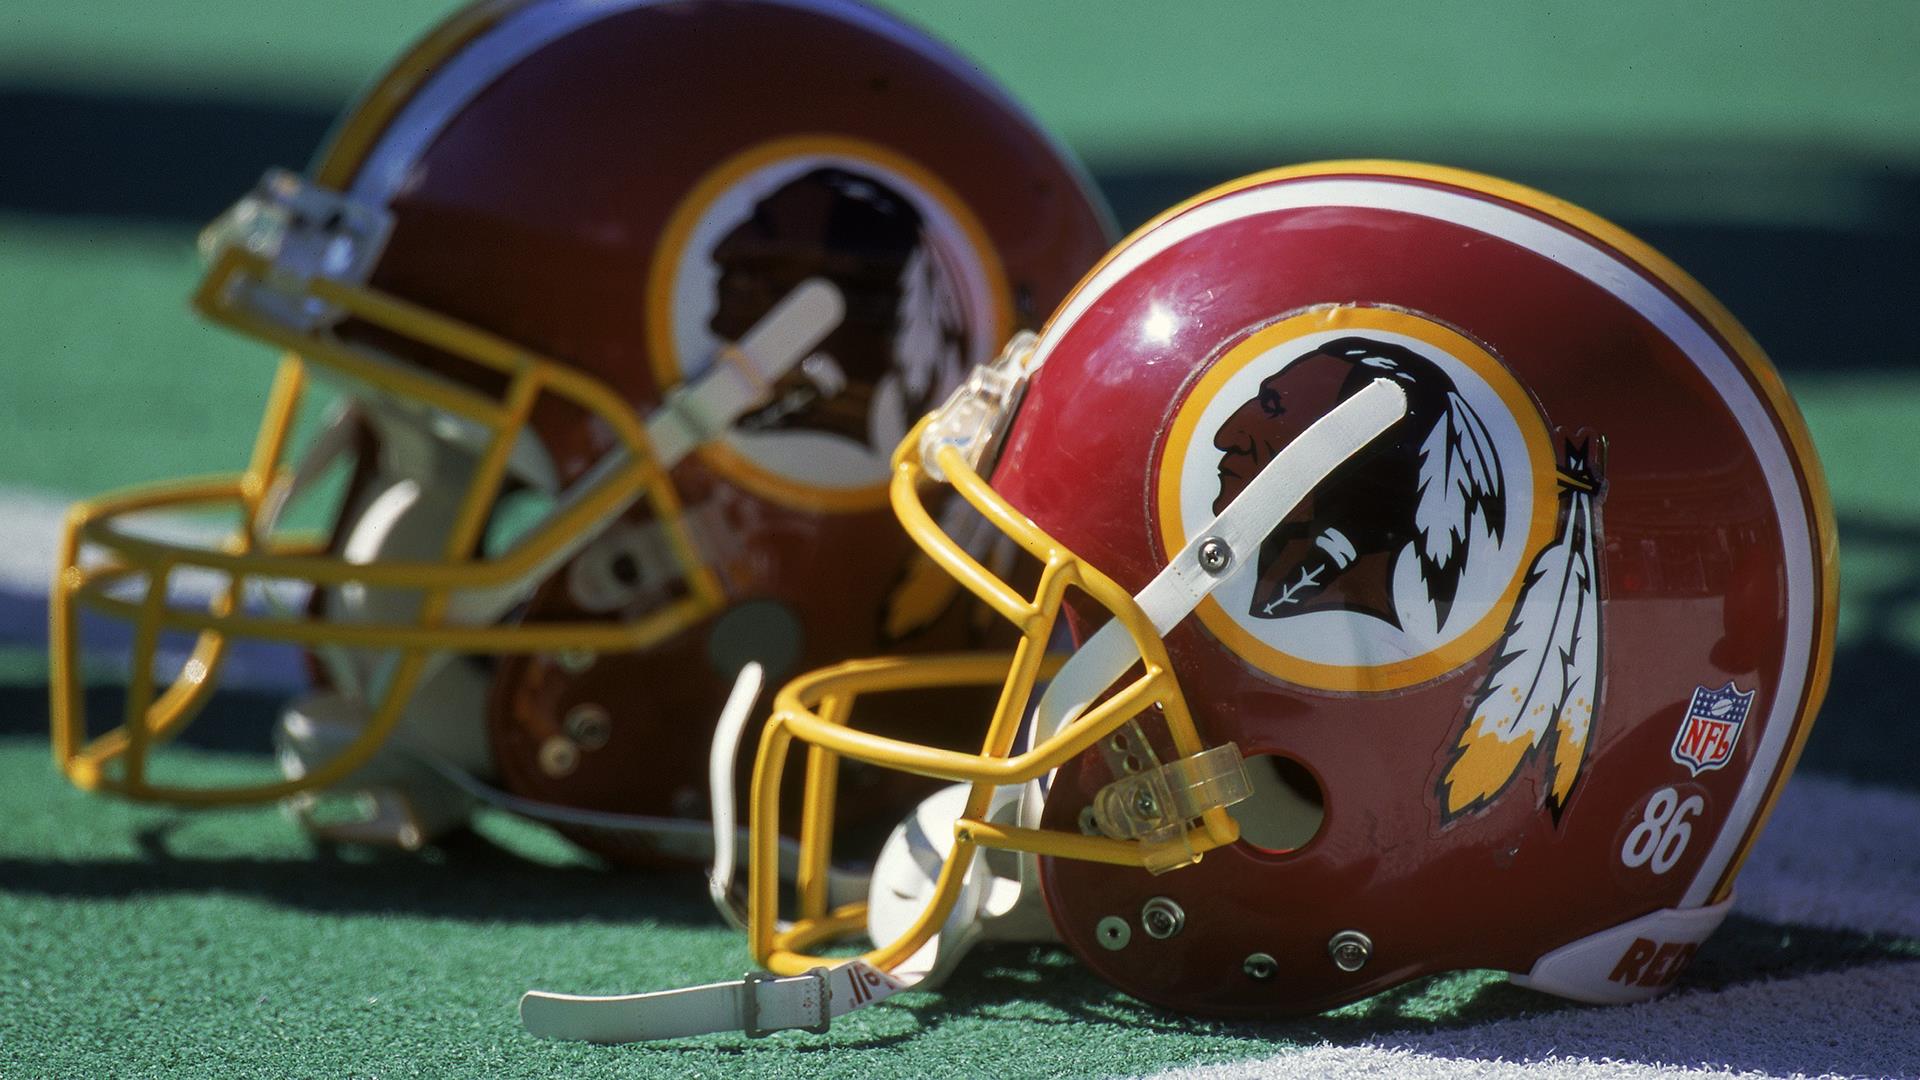 Washington Redskins cheerleaders' allegations spur new fallout